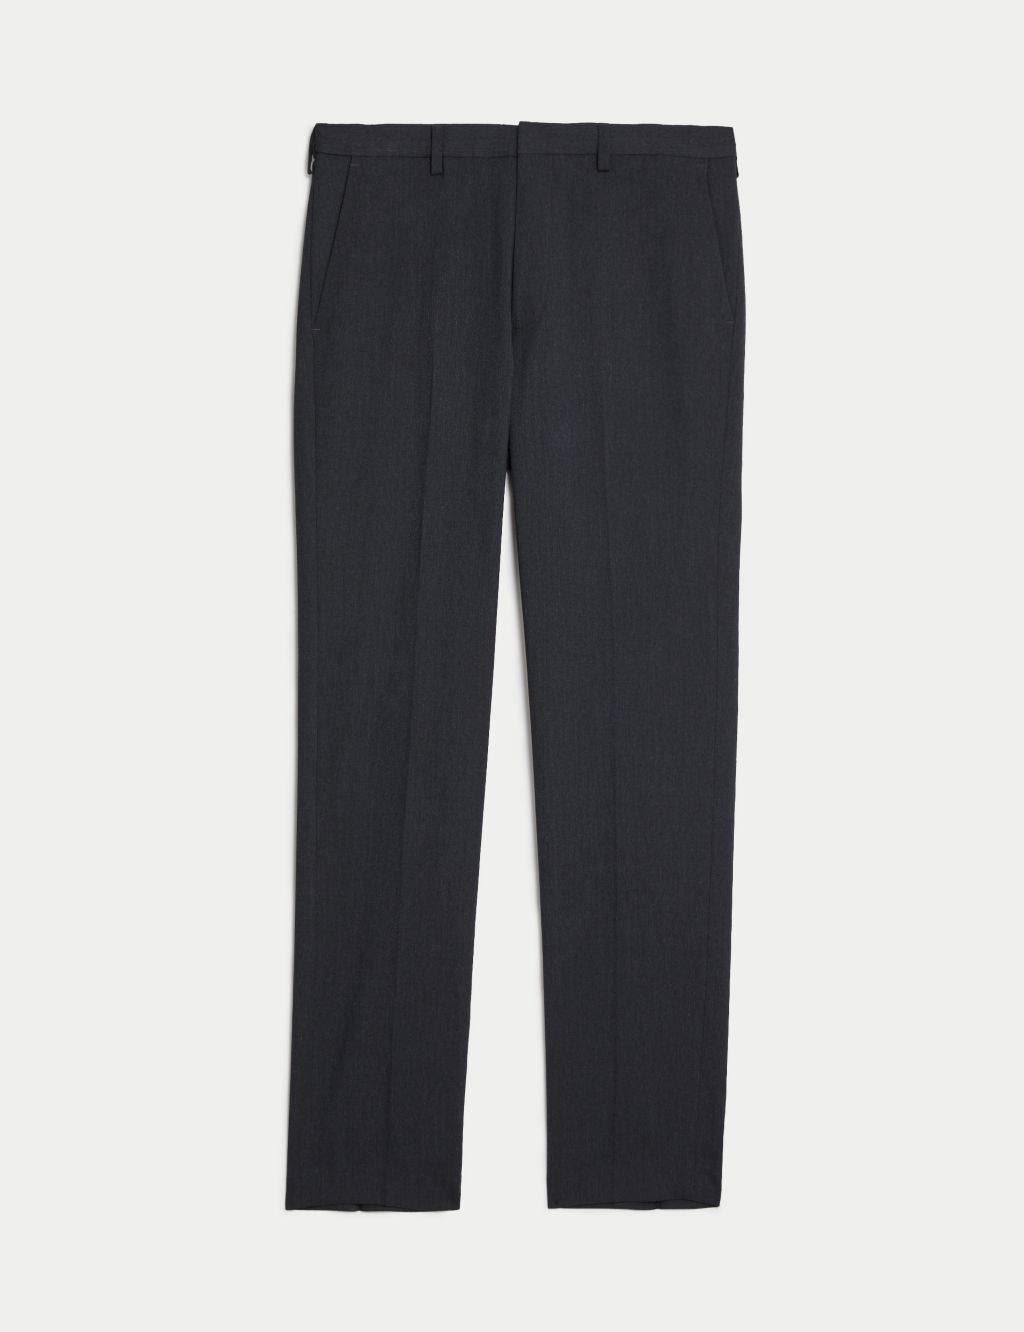 Regular Fit Stretch Trousers image 8